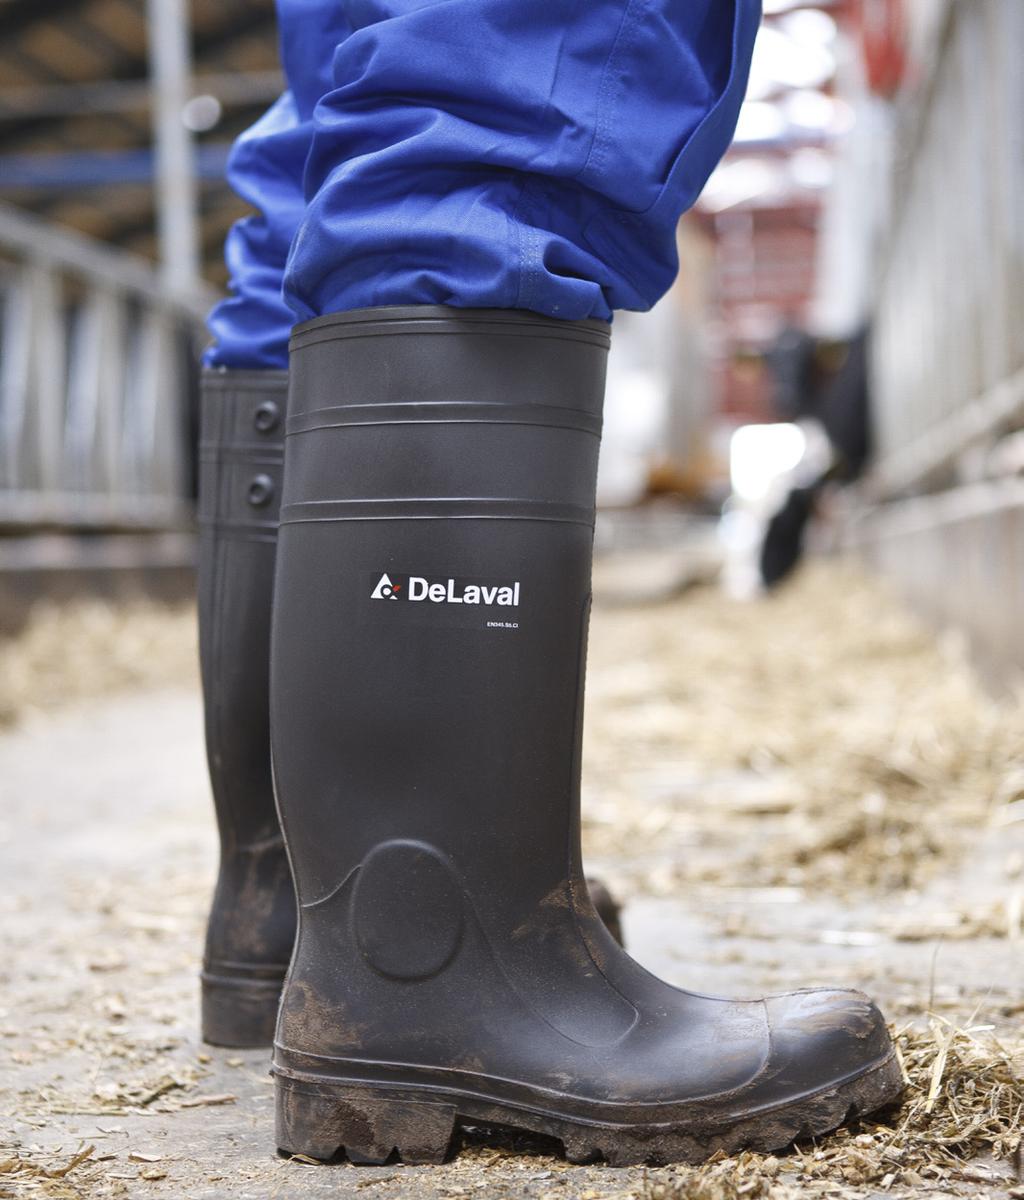 DeLaval safety PU boot The boots are thermally insulated; with a steel toecap; steel